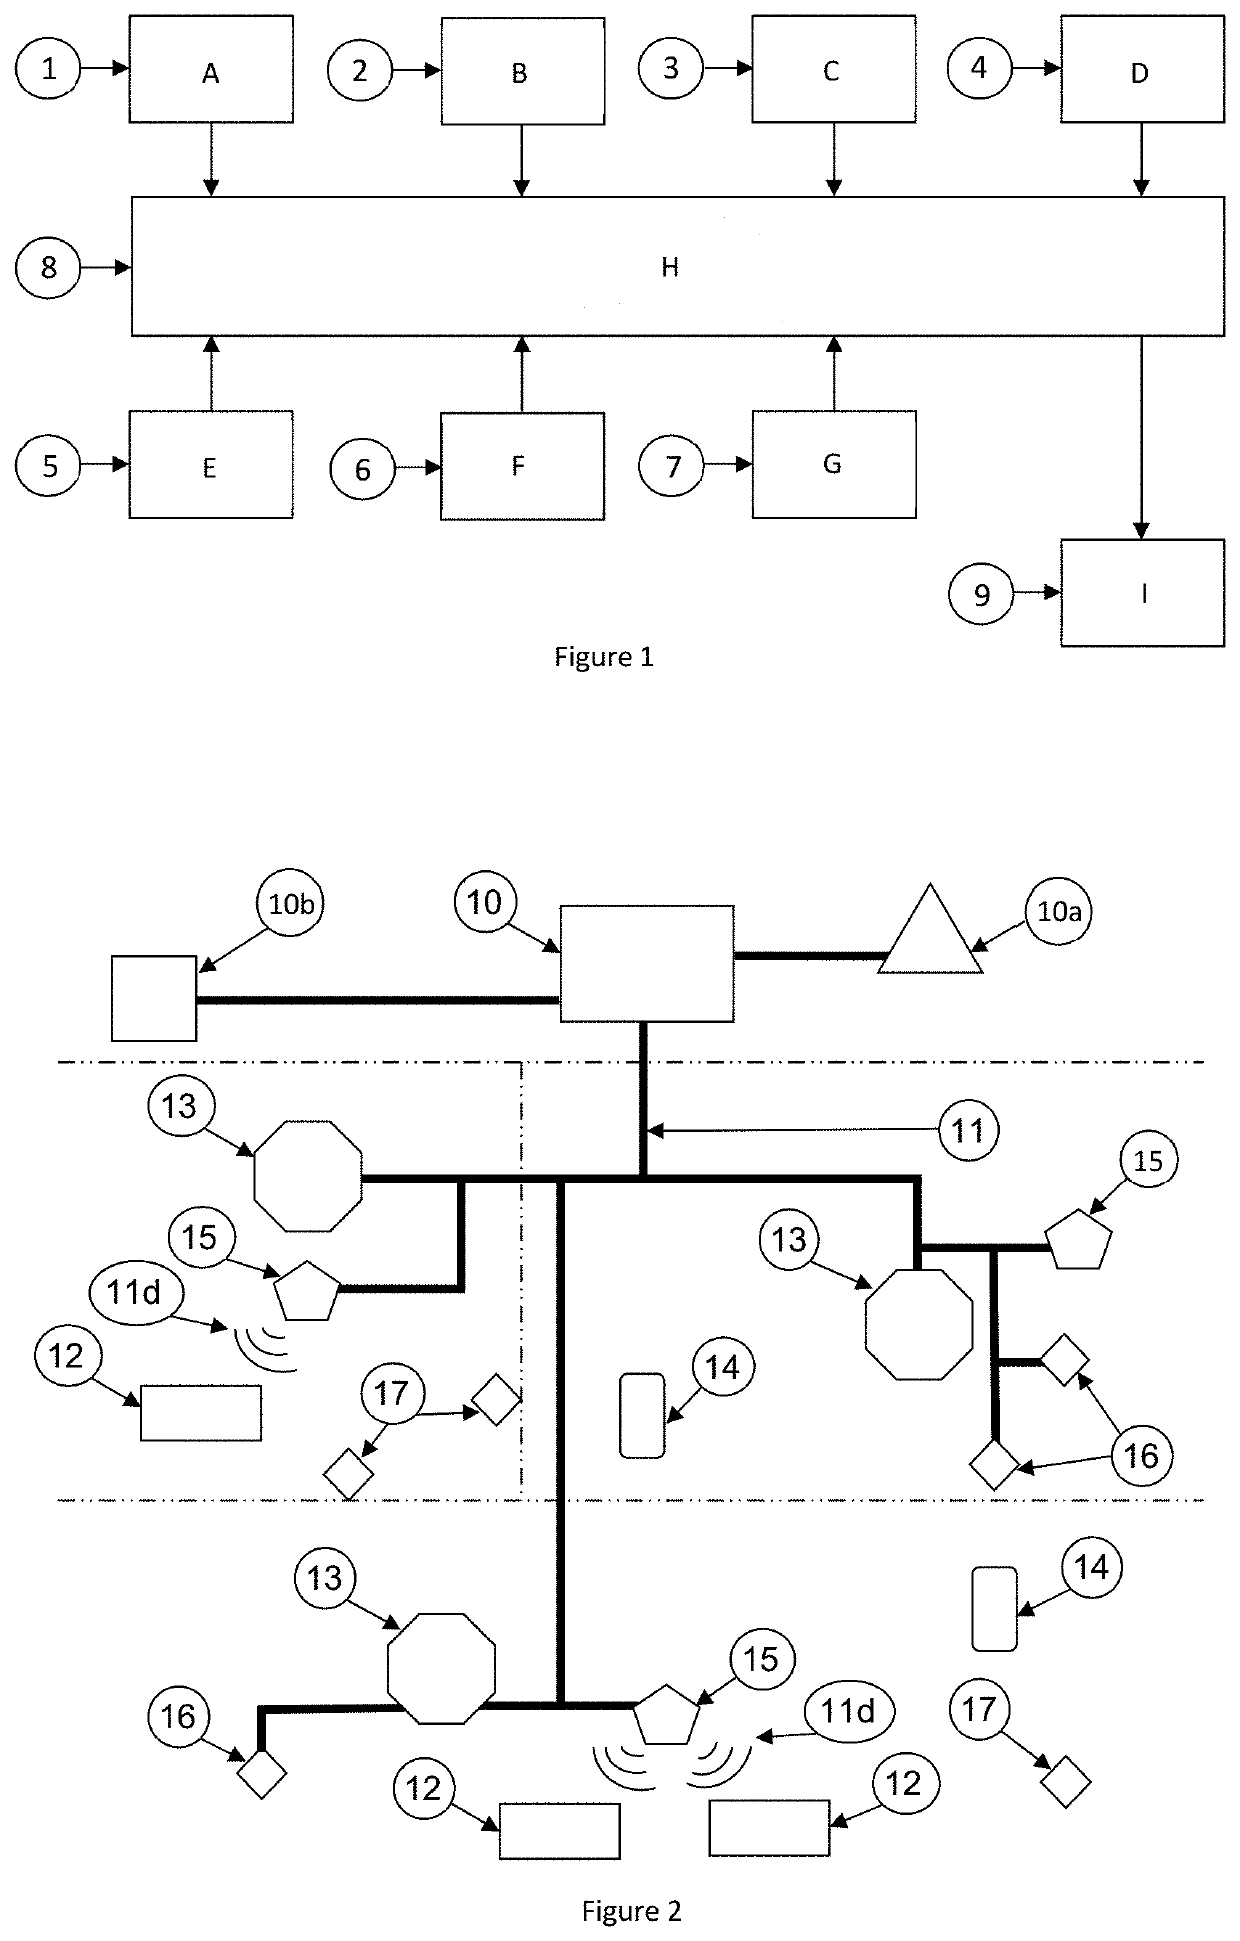 Method and System for Managing an Emergency